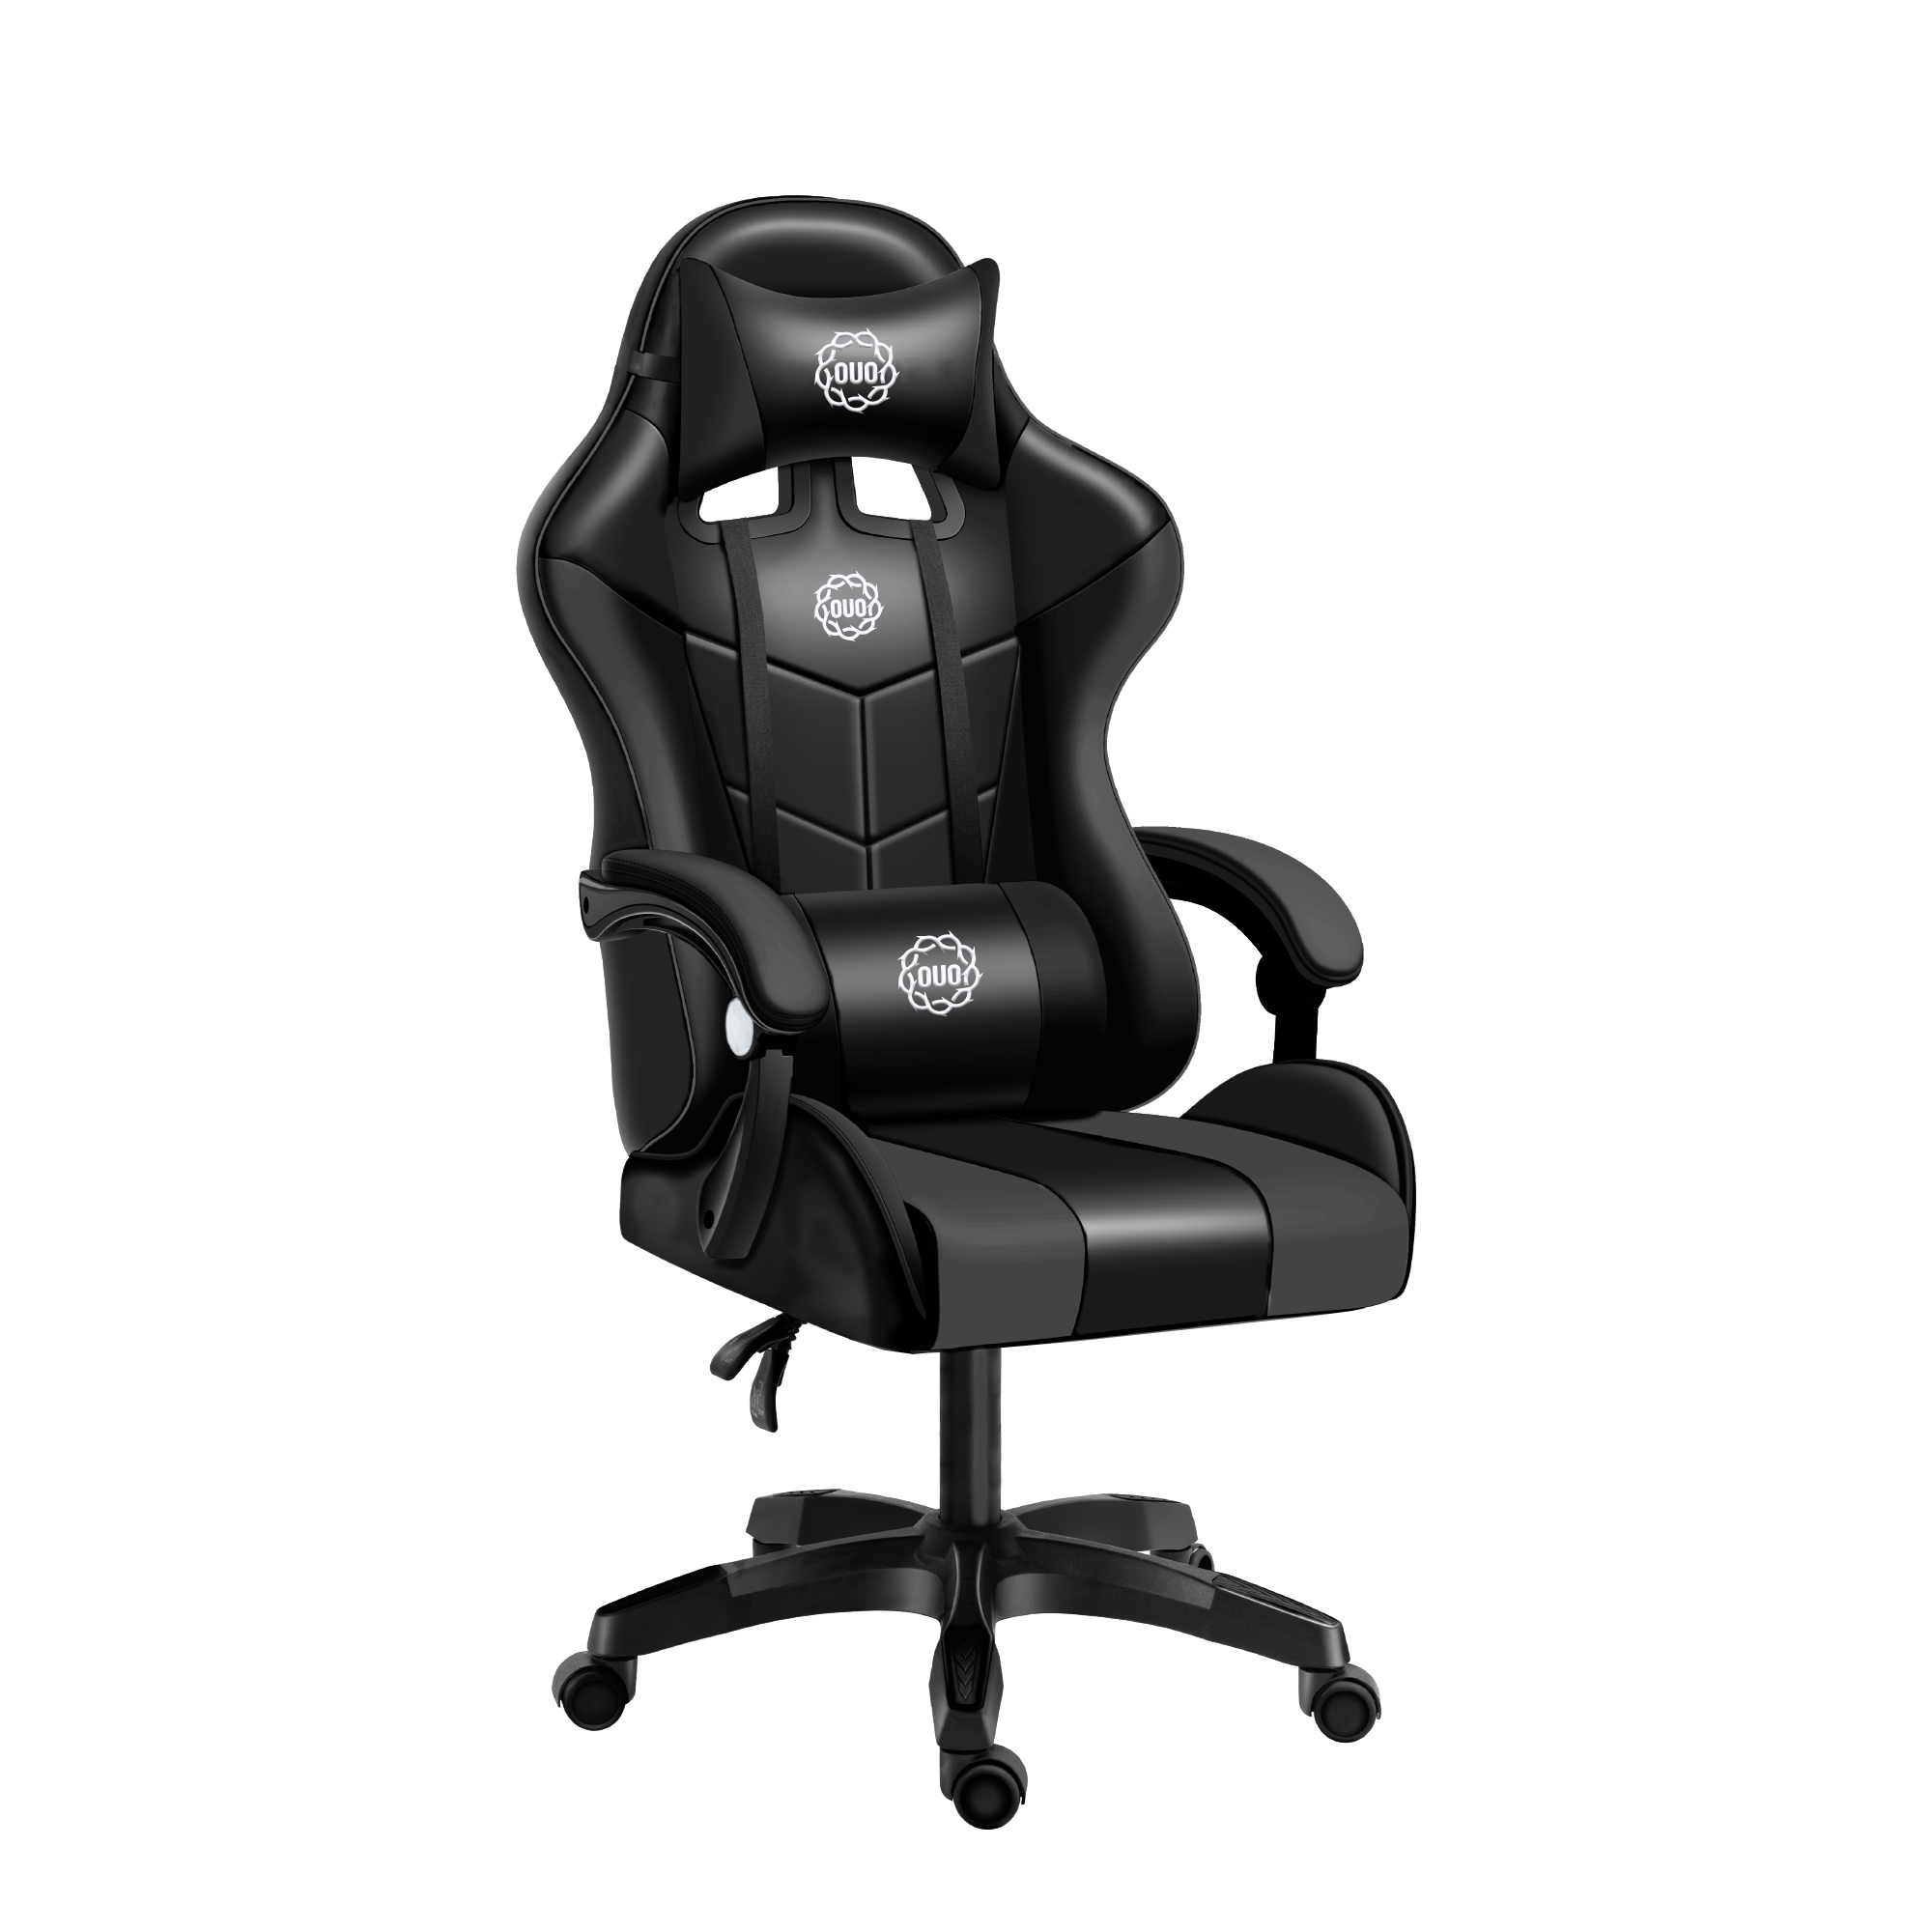 SILLA GAMER OUO YZ-022